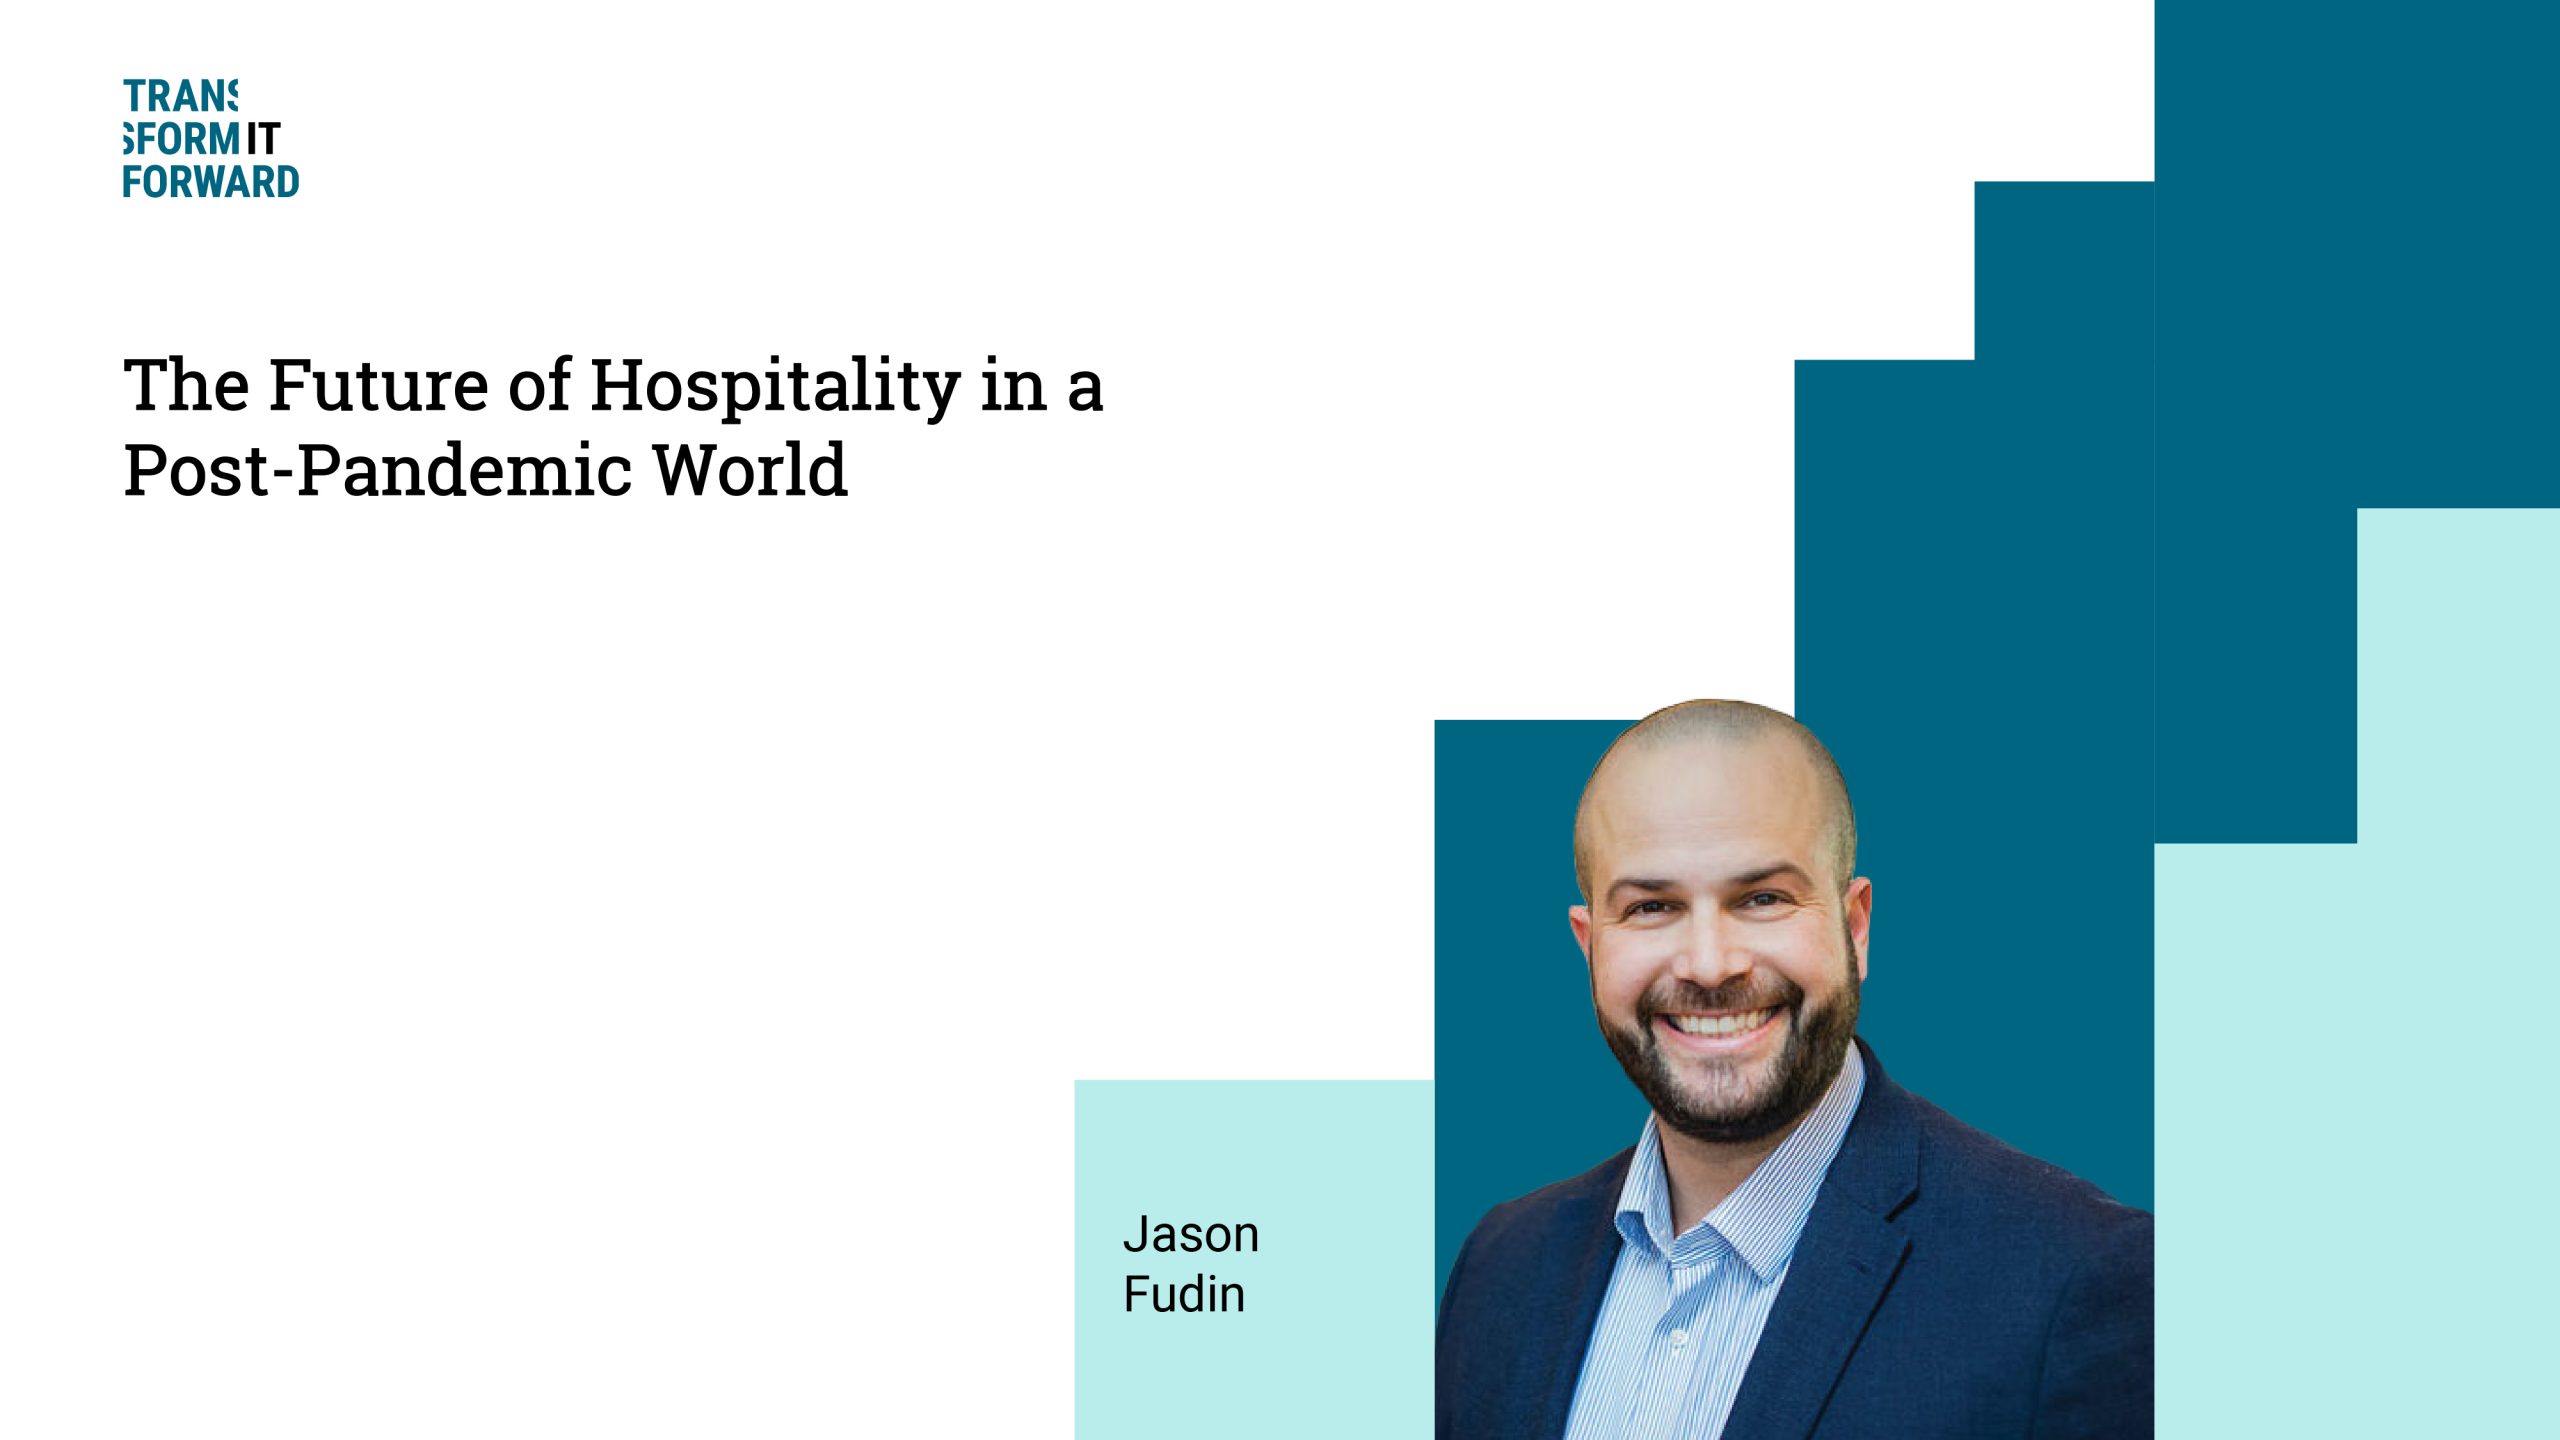 The future of hospitality in a post-pandemic world